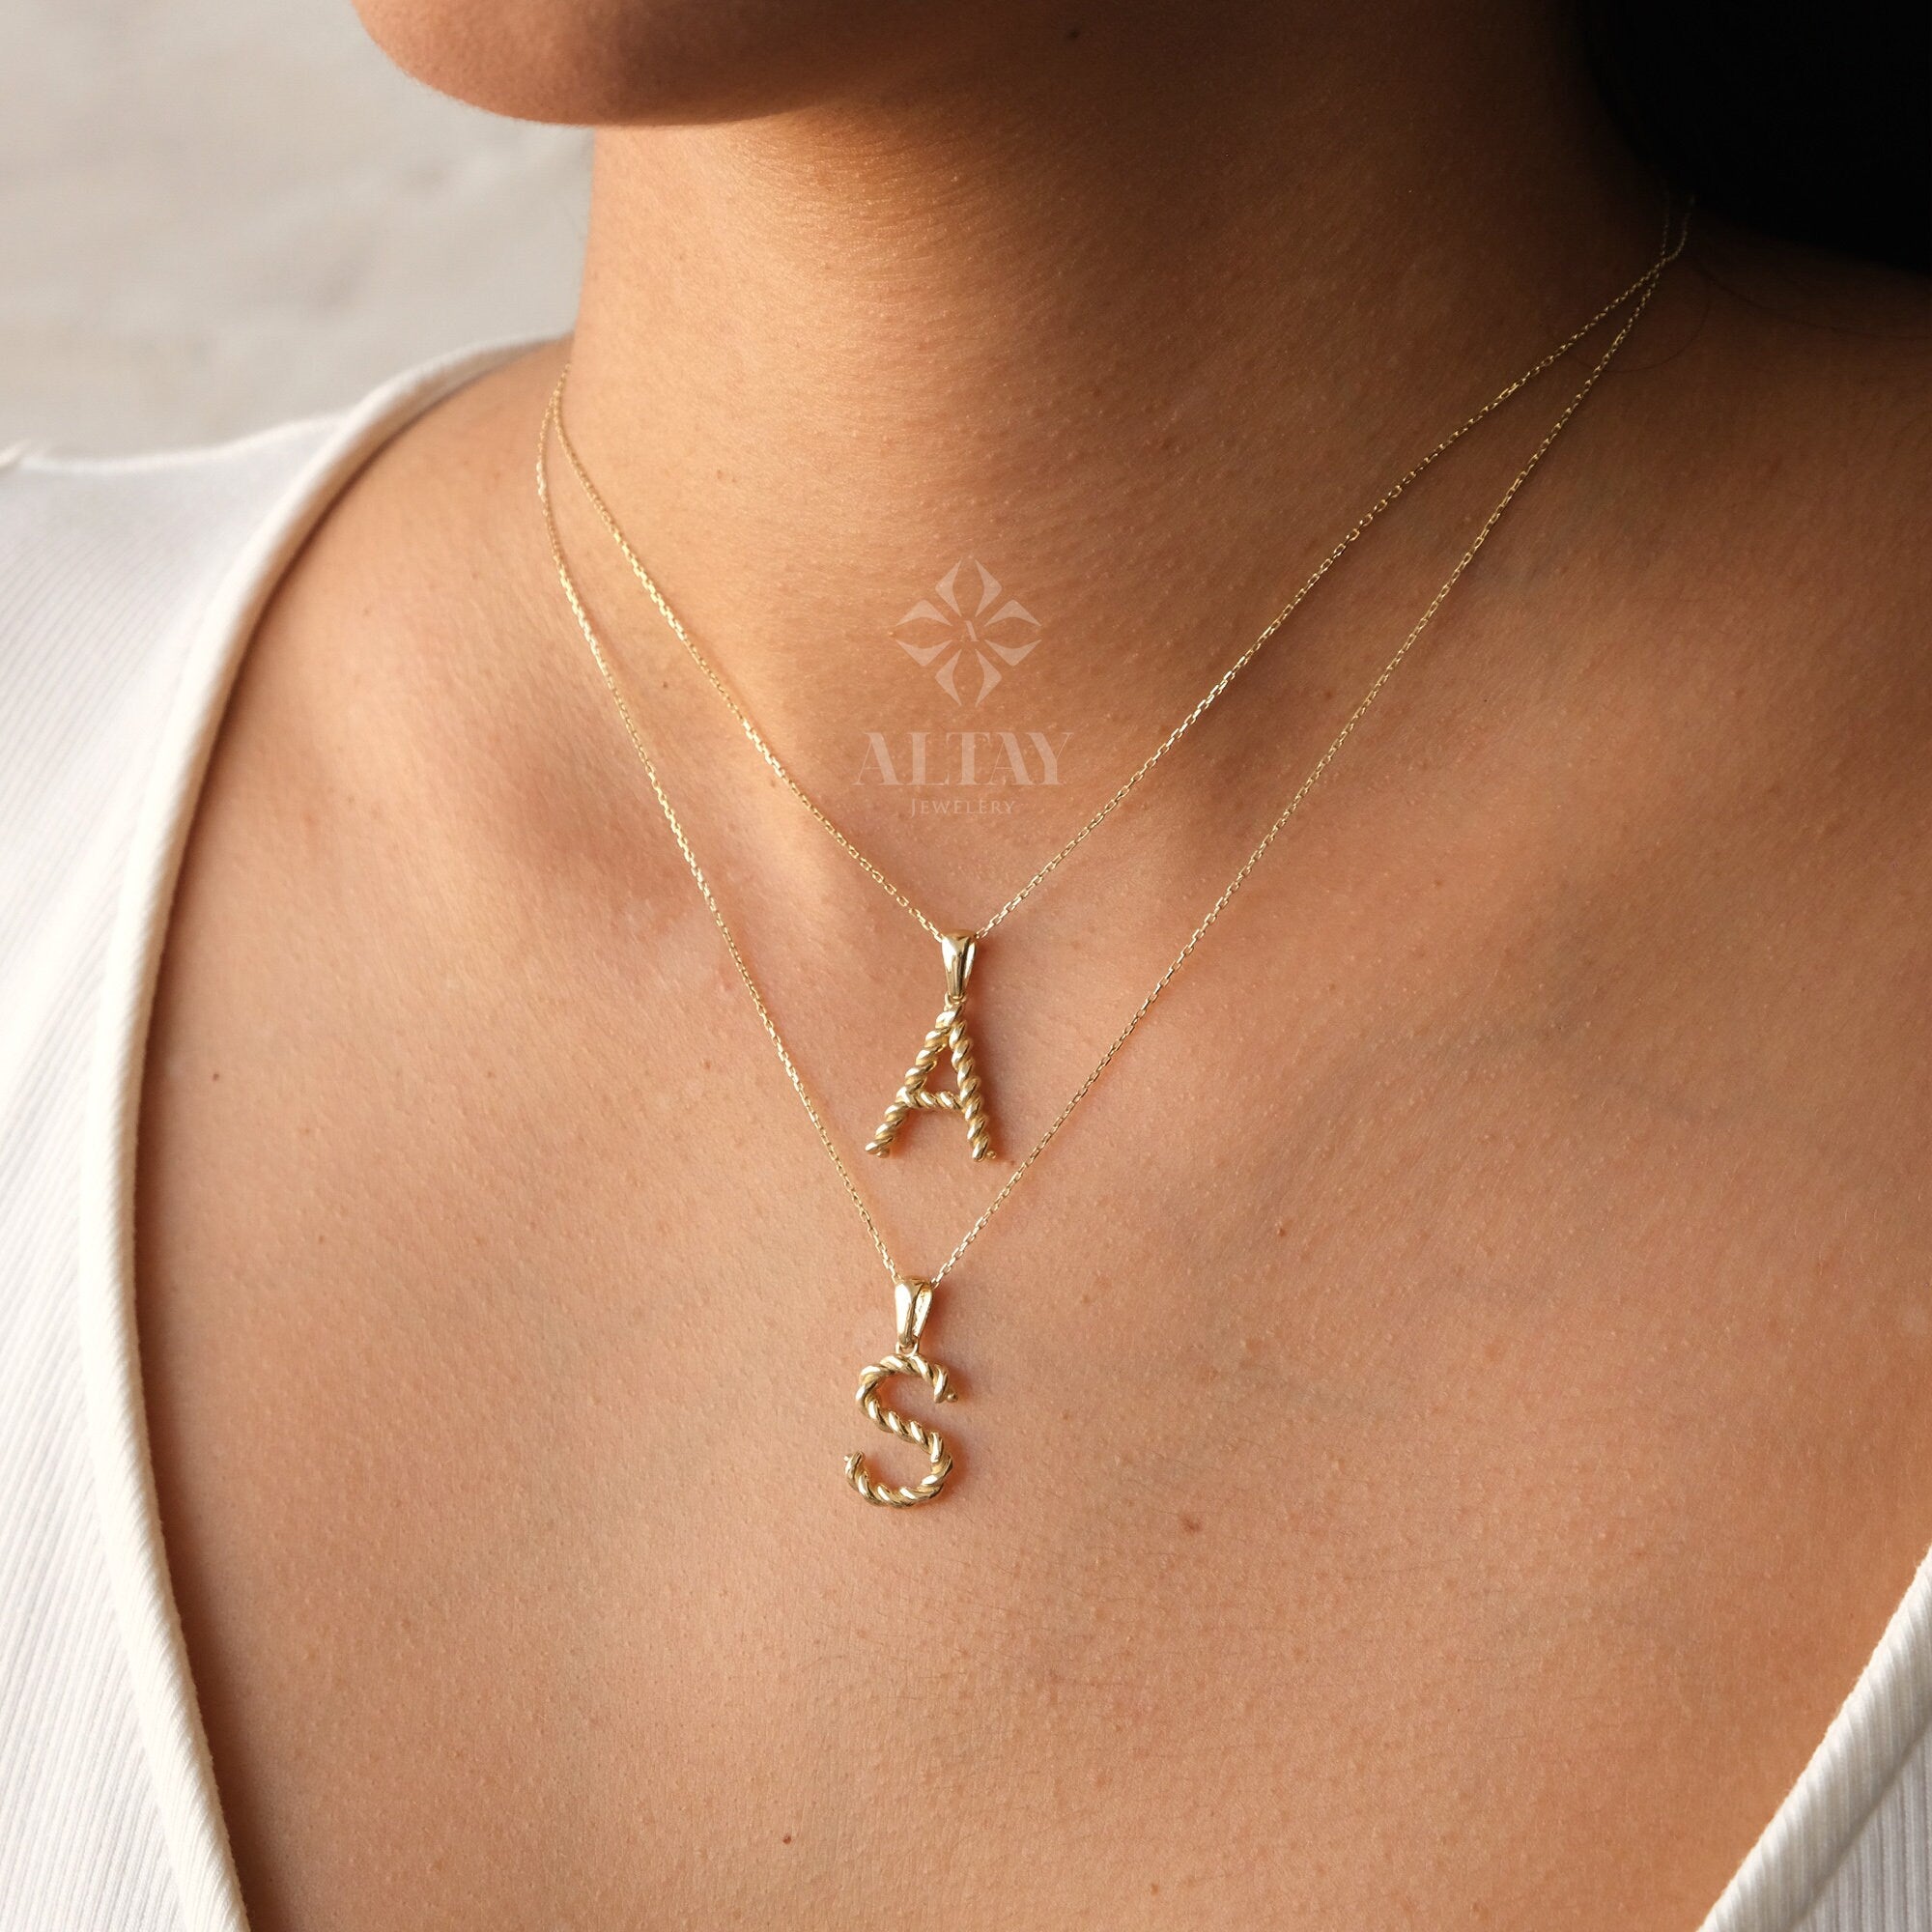 14K Gold Initial Necklace, Rope Gold Letter Necklace, Custom Personalized Necklace, Name Letter Necklace, Initial Charm Pendant, Christmas